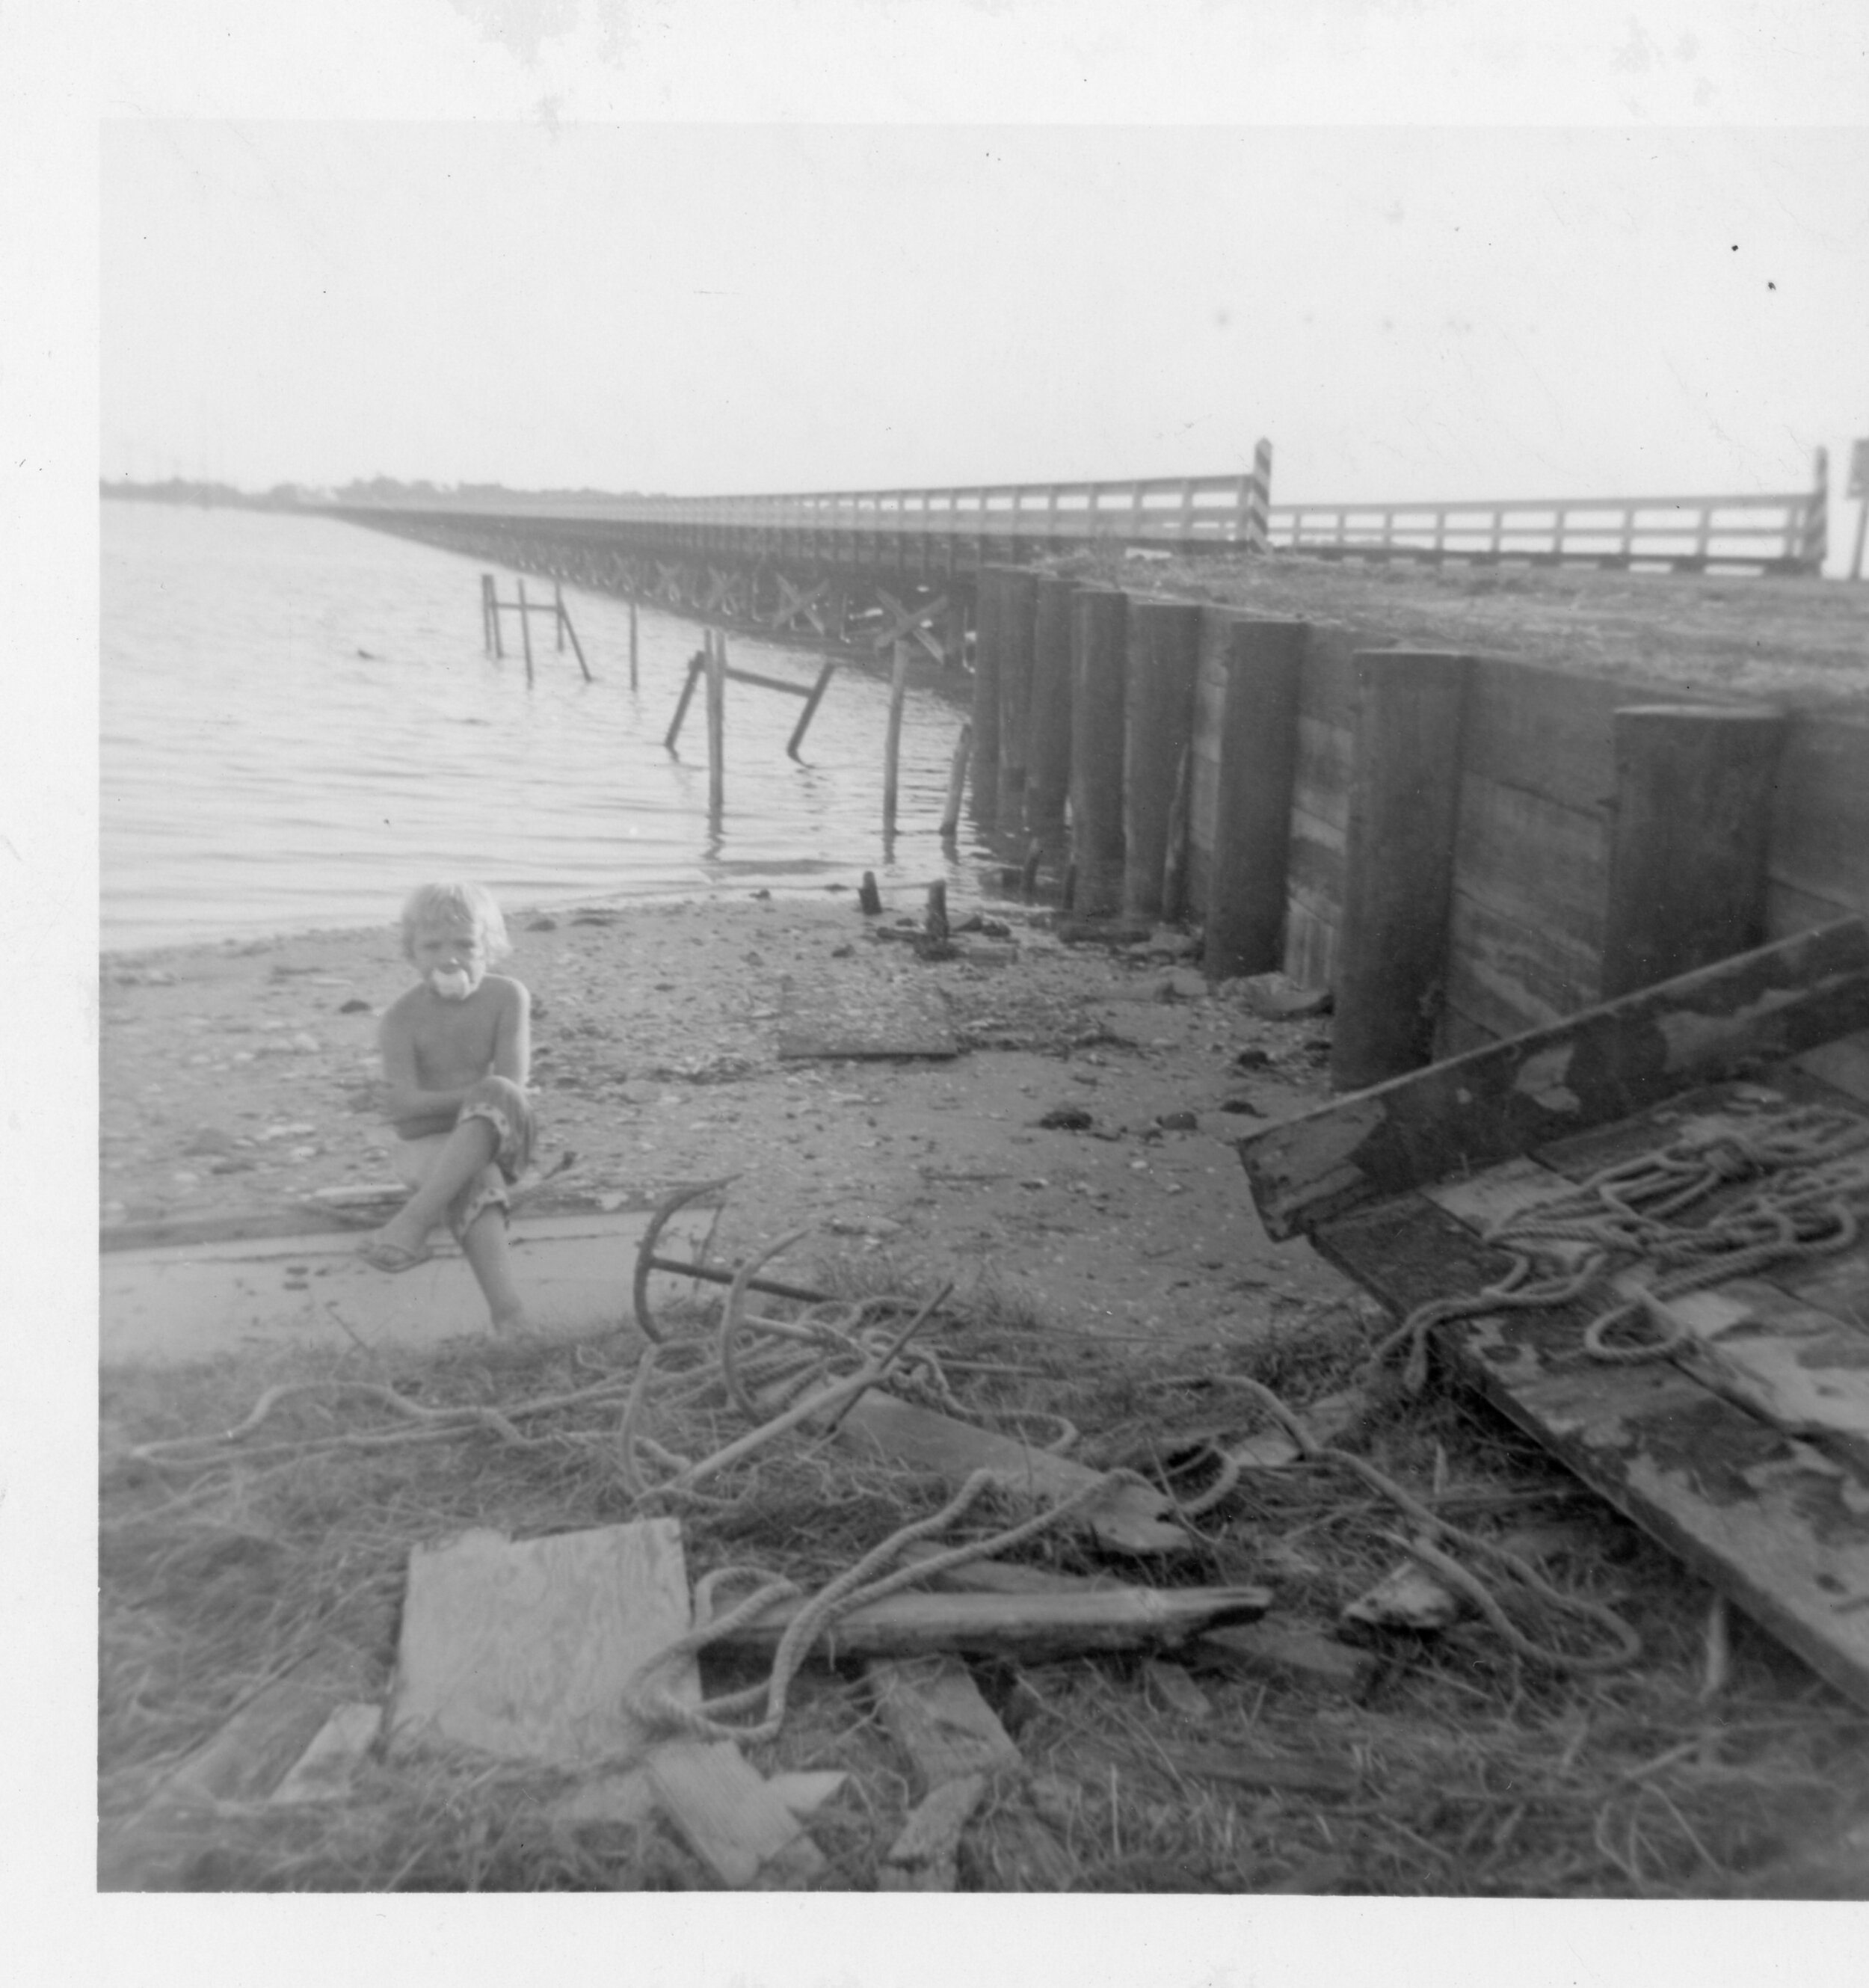 Ginger Chadwick sitting on a skiff beside where the Danny Damren’s boat dock used tobe–where he rented boats by the Harkers Island Bridge